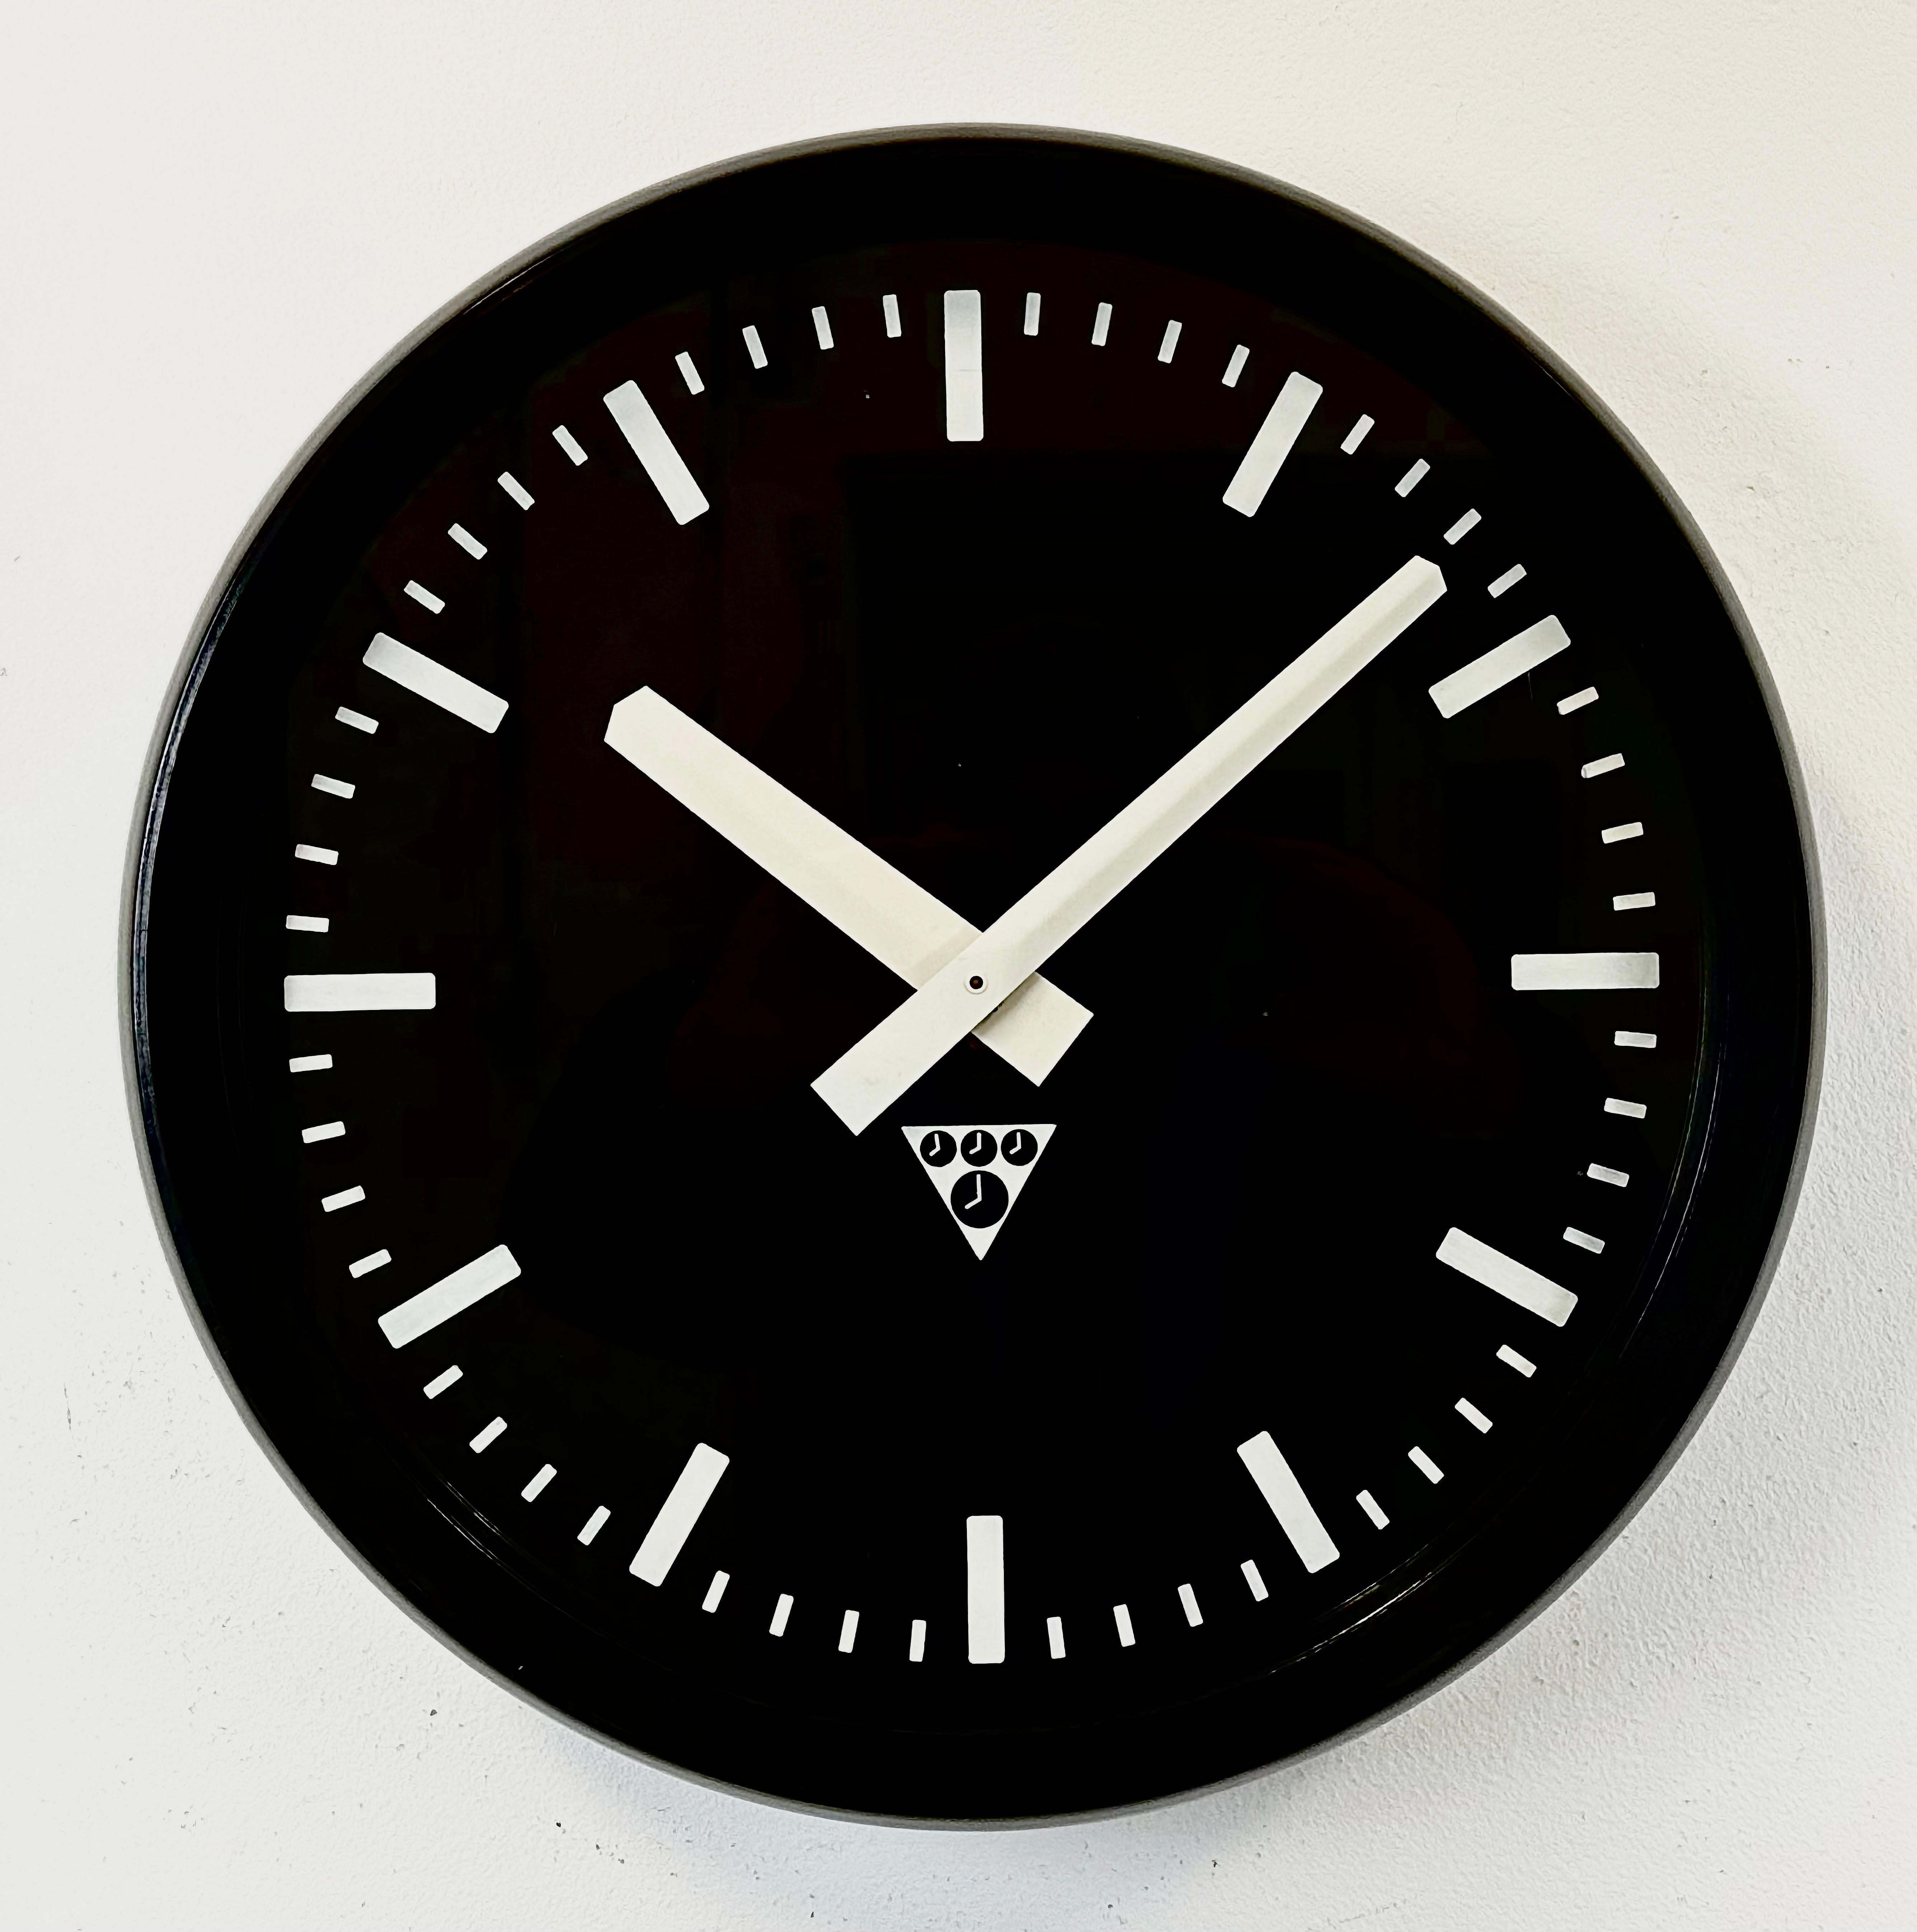 This wall clock was produced by Pragotron in former Czechoslovakia during the 1970s. The piece features a brown bakelite frame, a black bakelite dial, an aluminum hands and a clear glass cover. The piece has been converted into a battery-powered